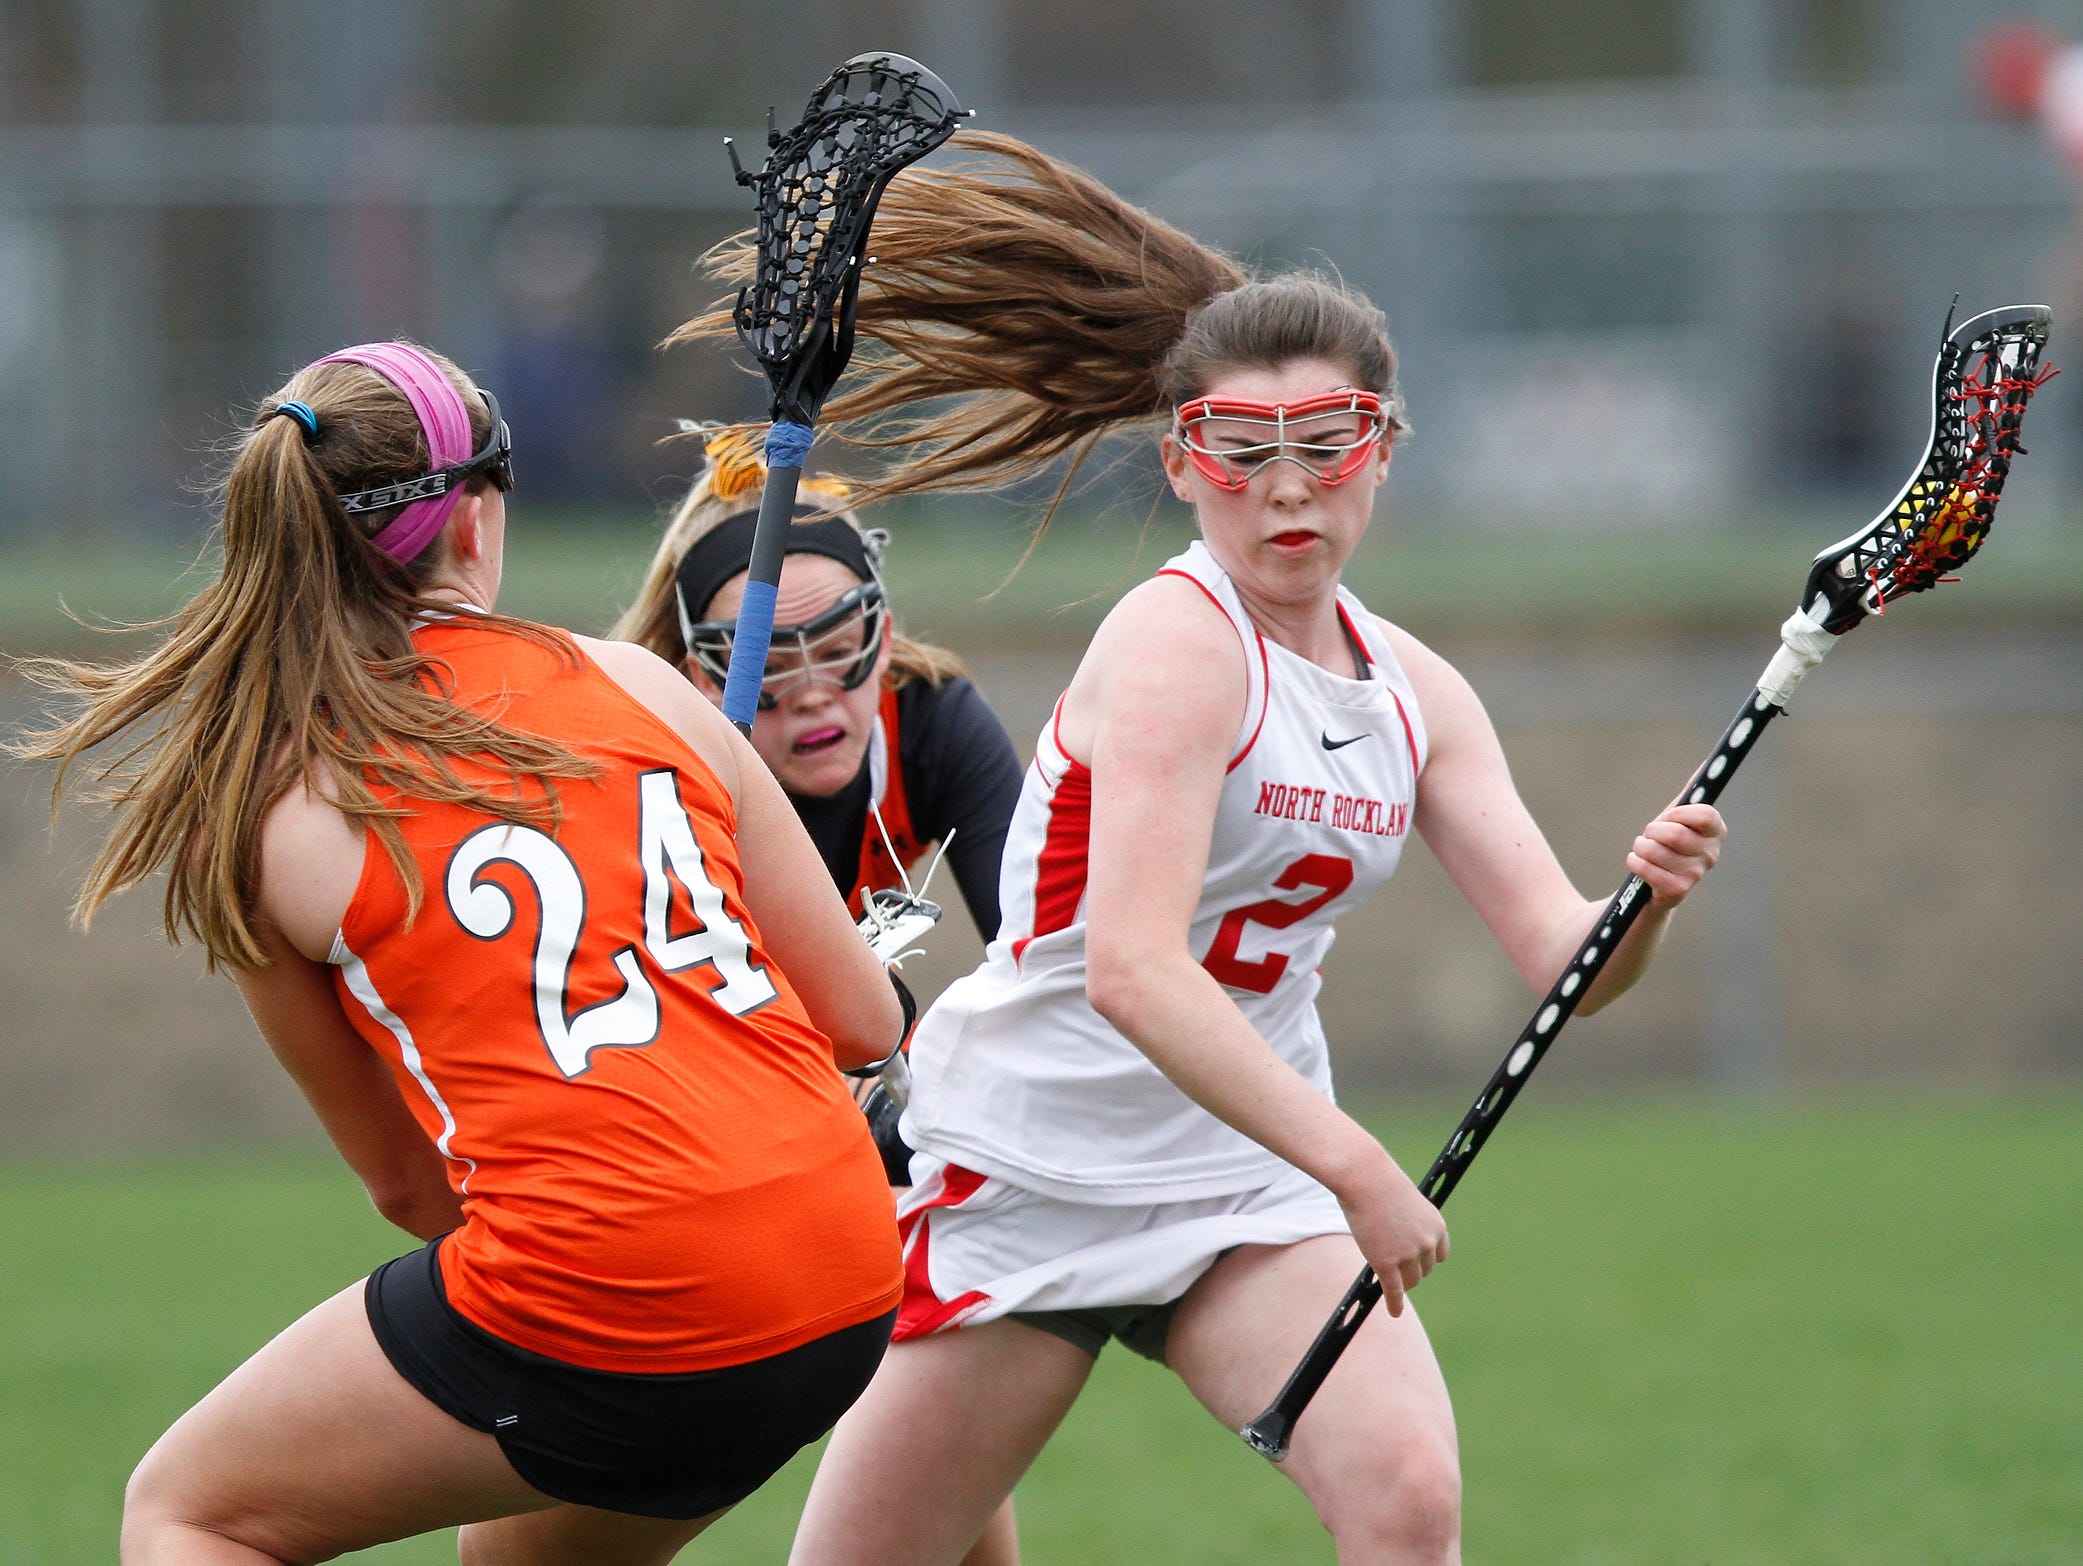 North Rockland's Elizabeth Fox (2) works the ball around Mamaroneck's Cassie Budill (24) during a girls lacrosse game at North Rockland High School in Thiells on Saturday, April 02, 2016.